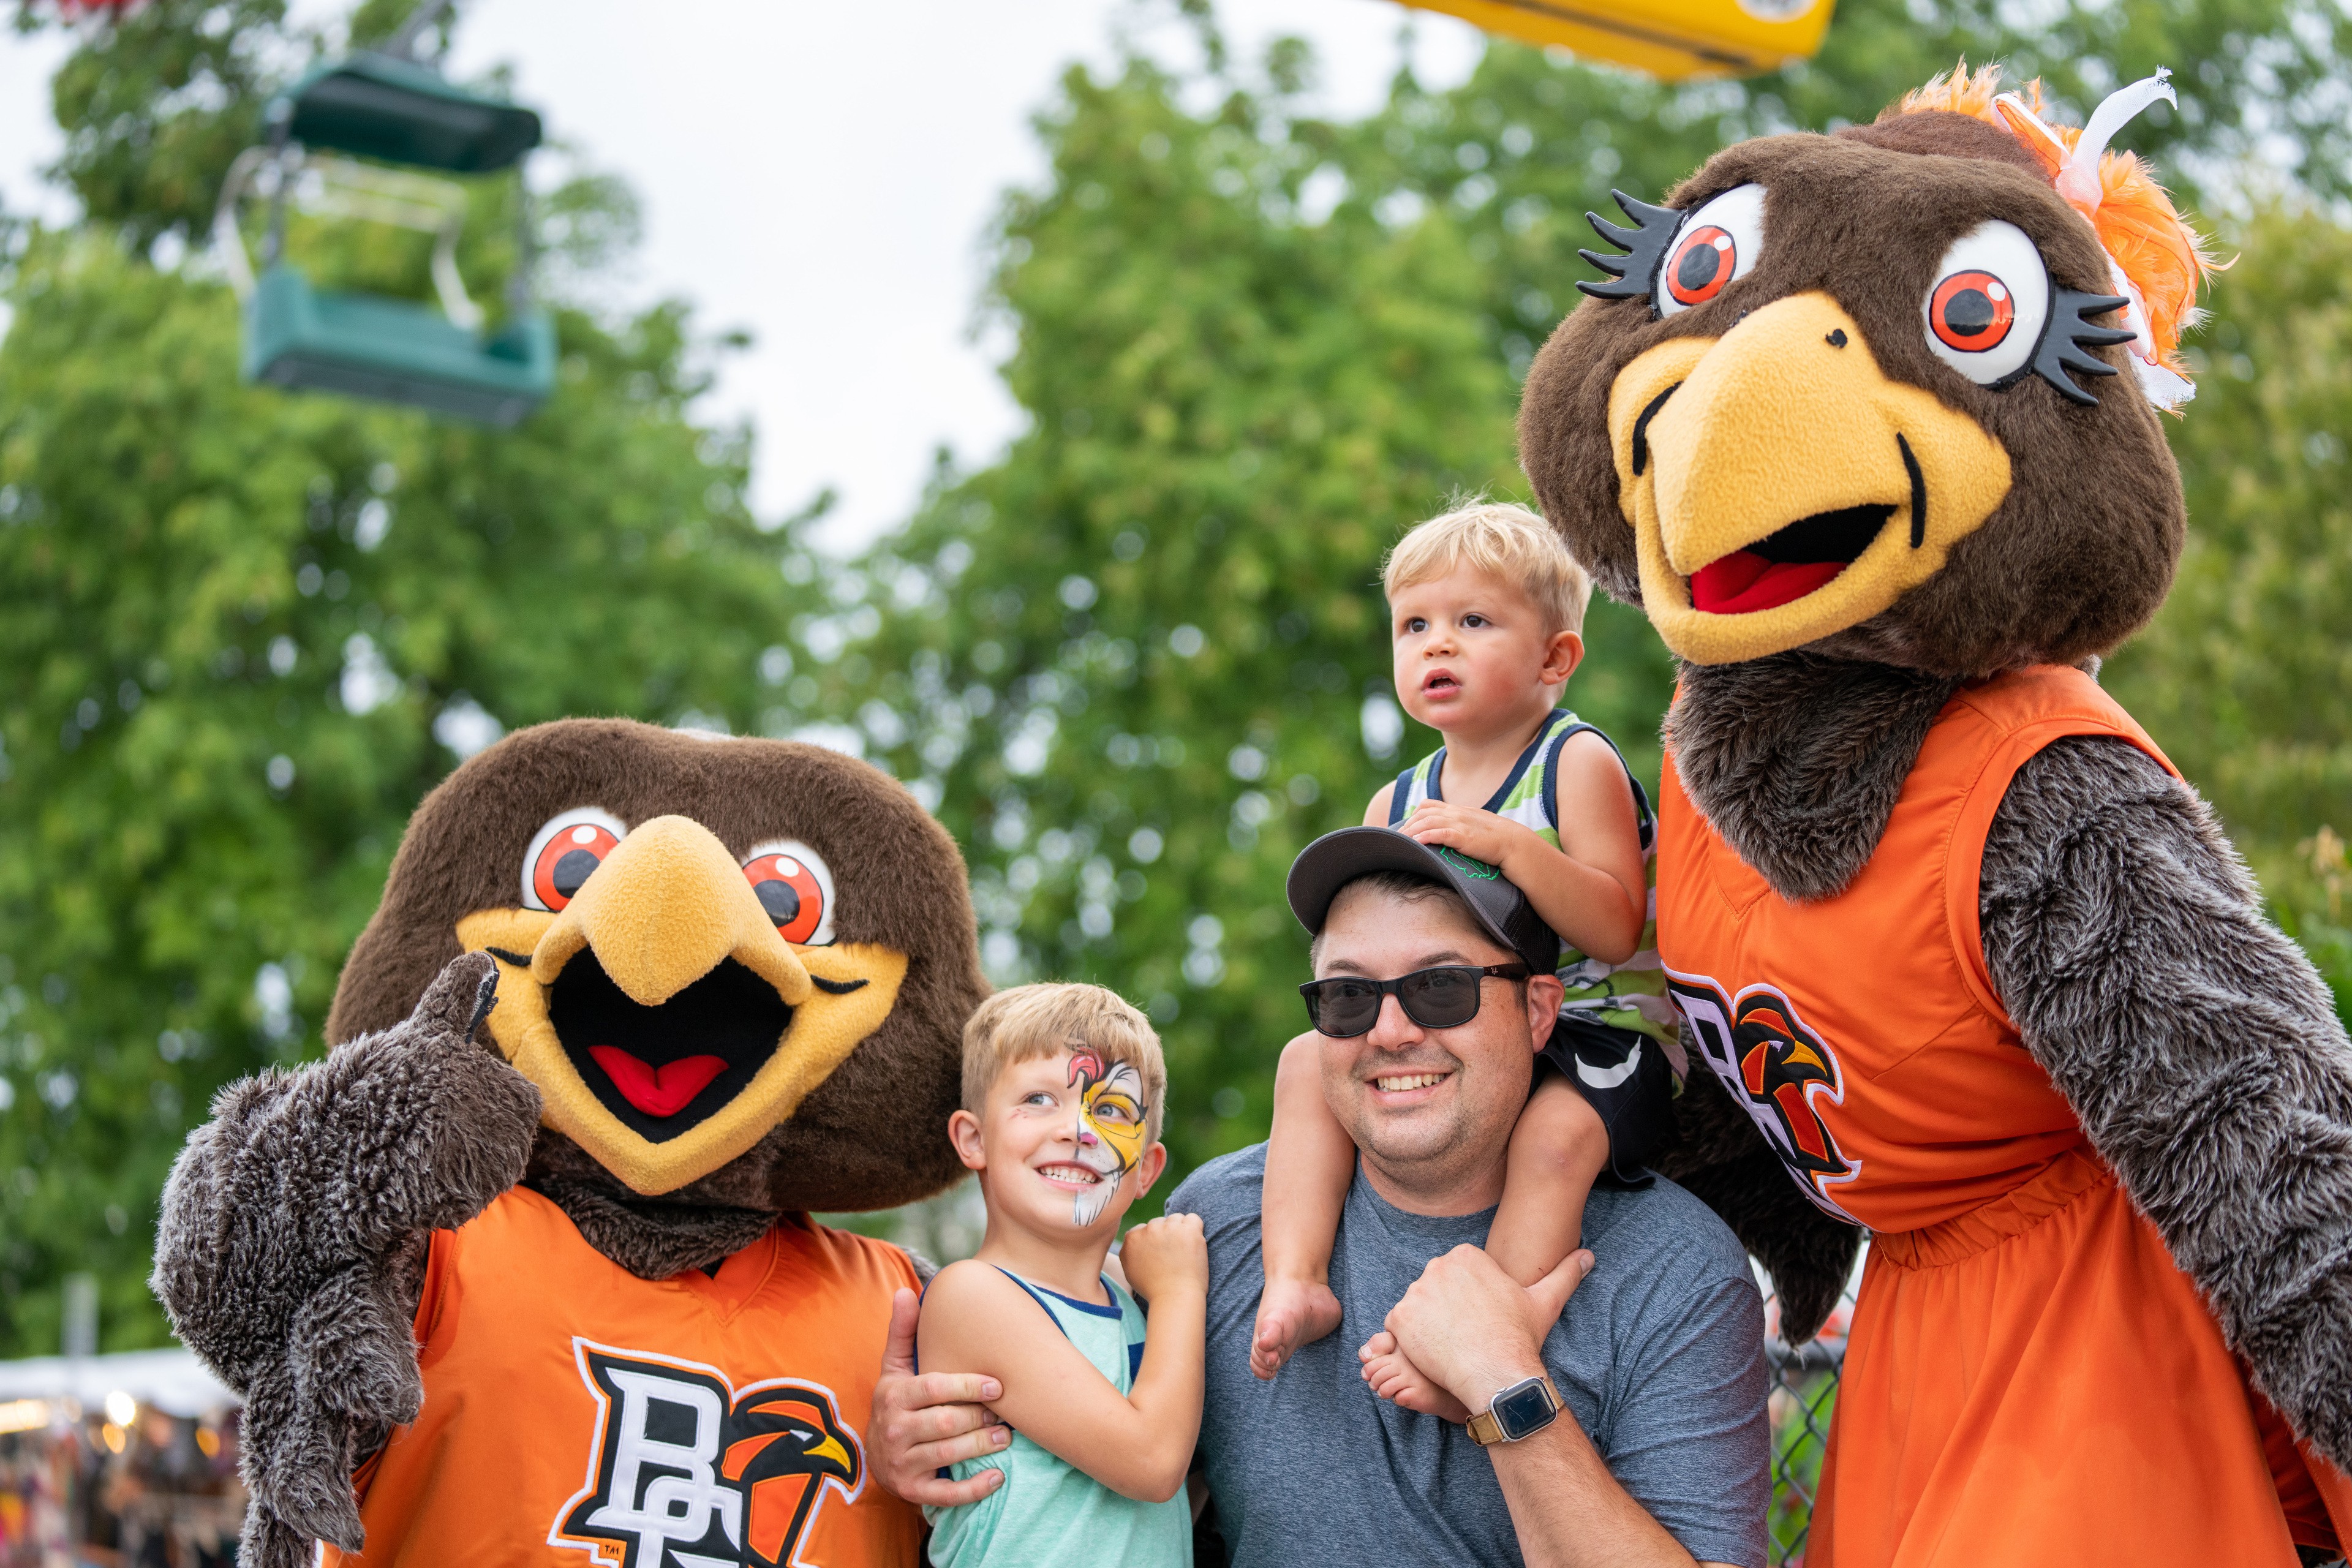 Freddie and Frieda Falcon pose with fans at the Ohio State Fair midway.